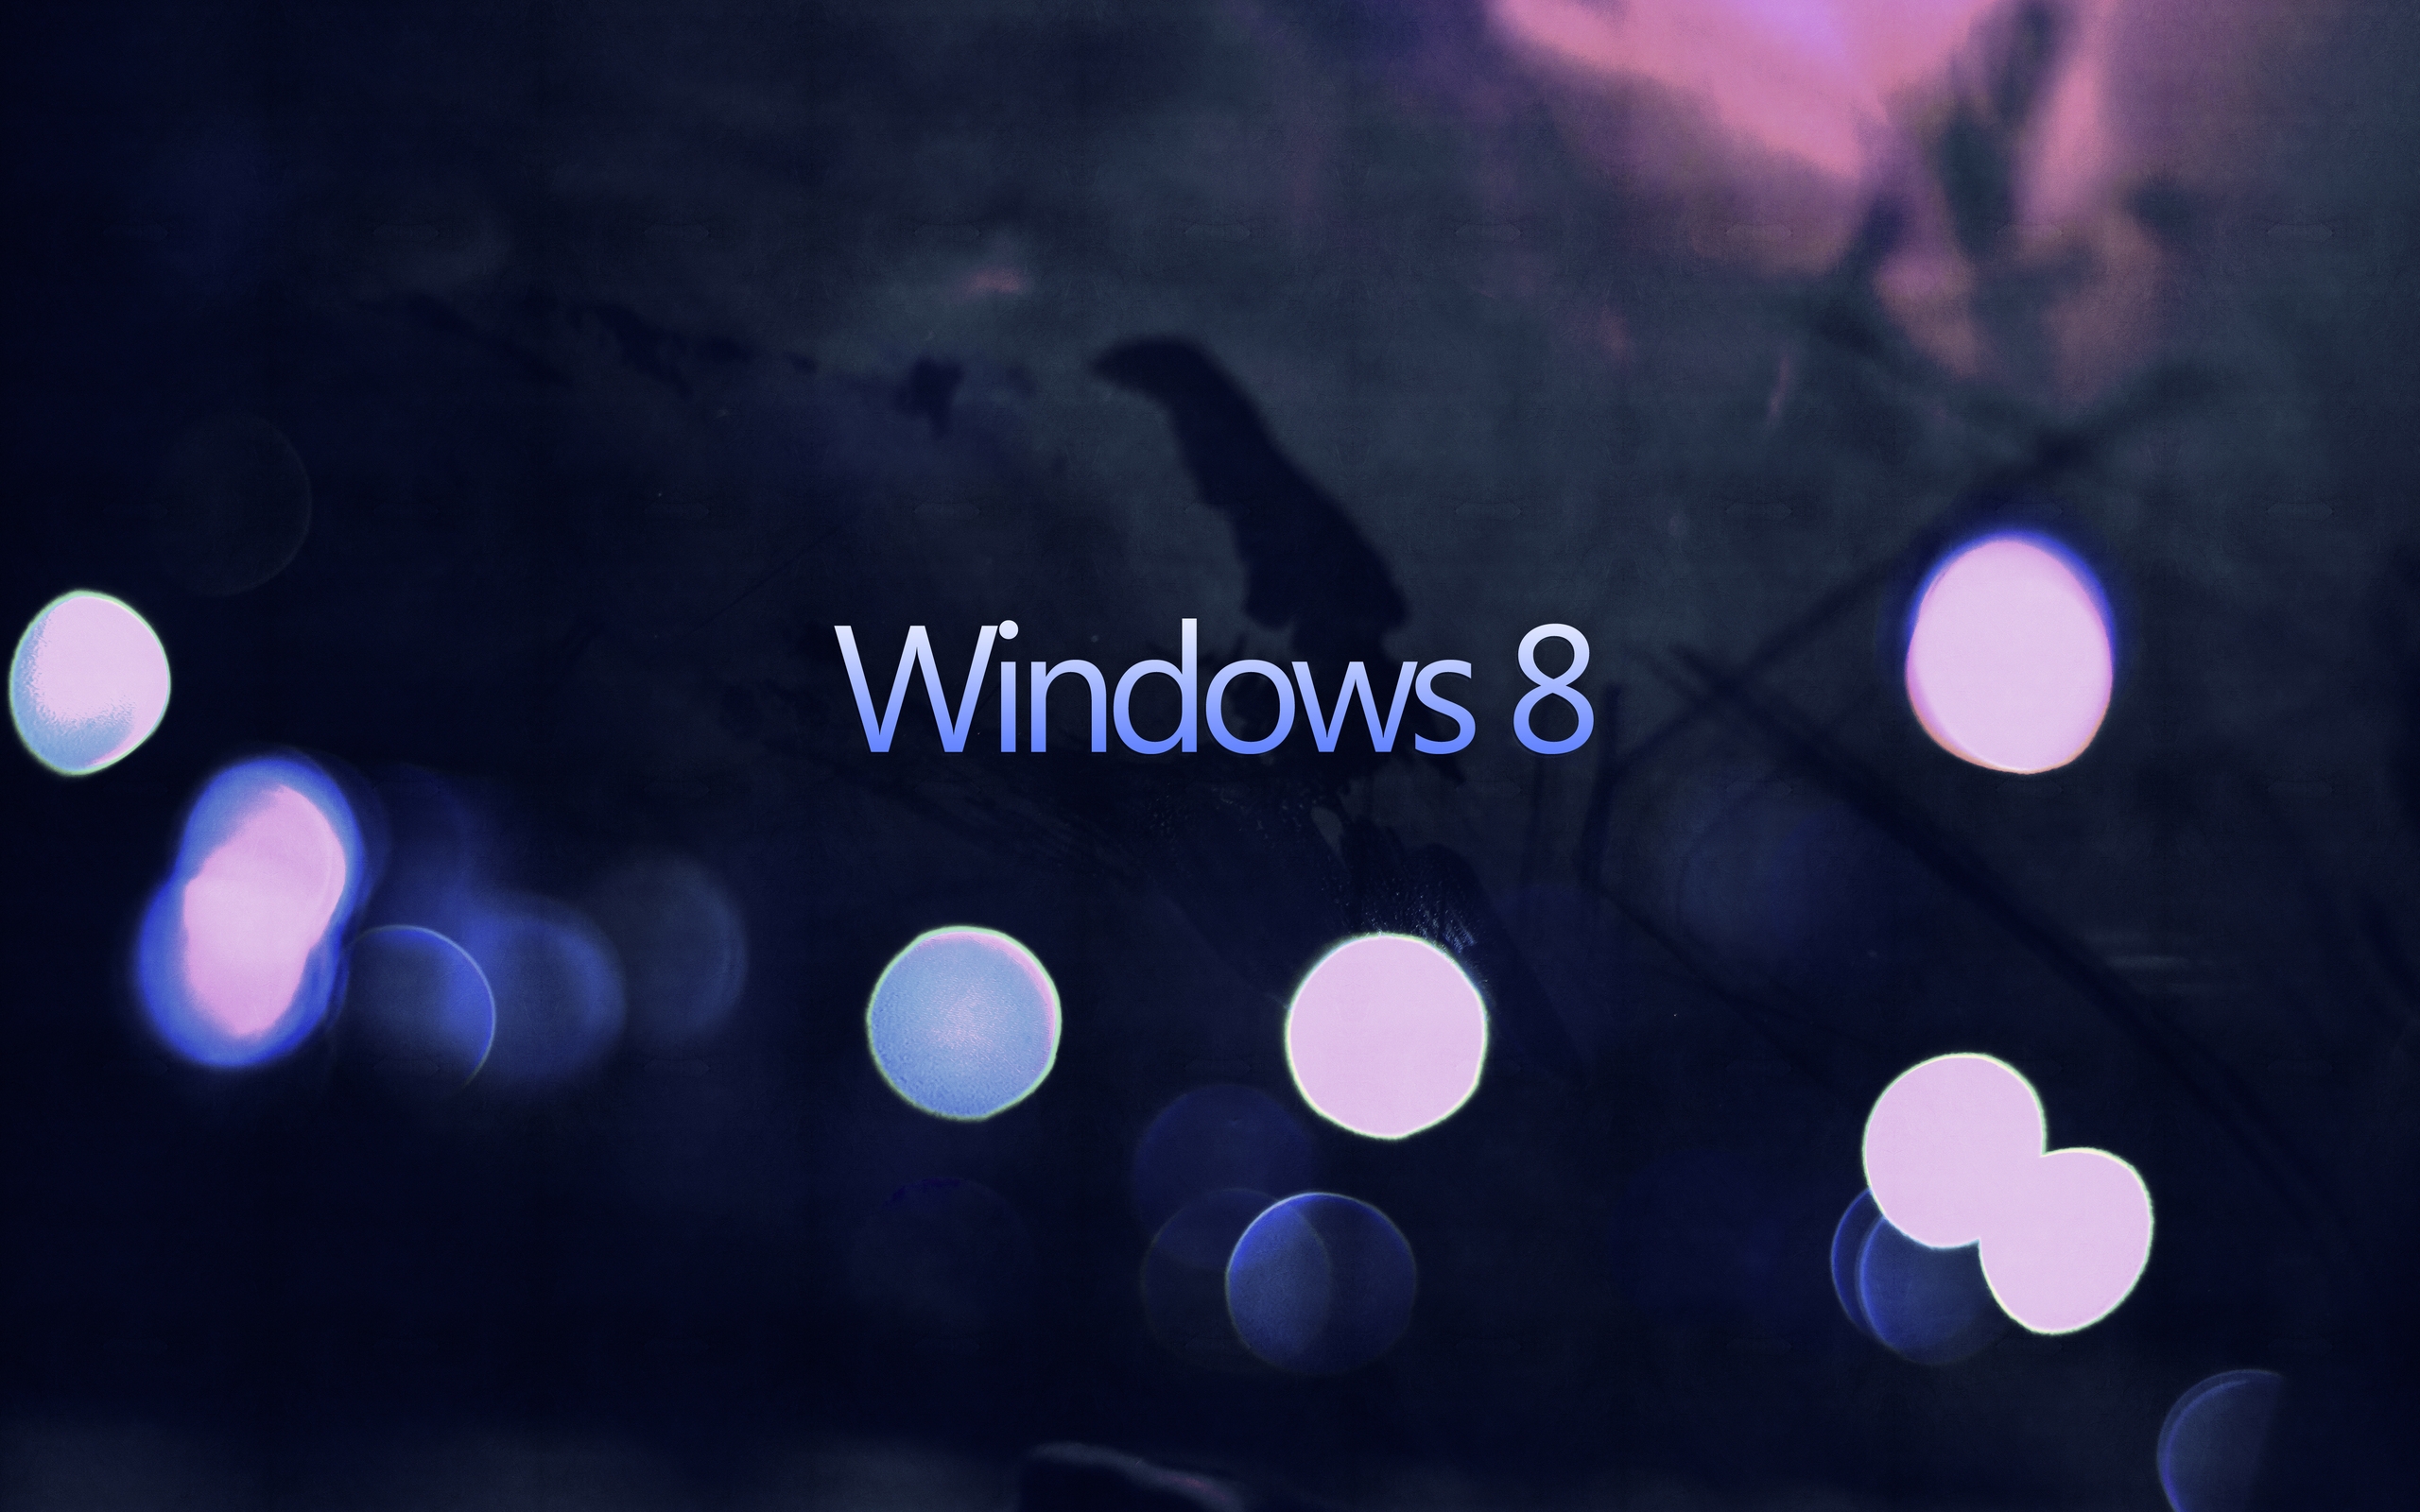 Simple Windows 8 for 2560 x 1600 widescreen resolution